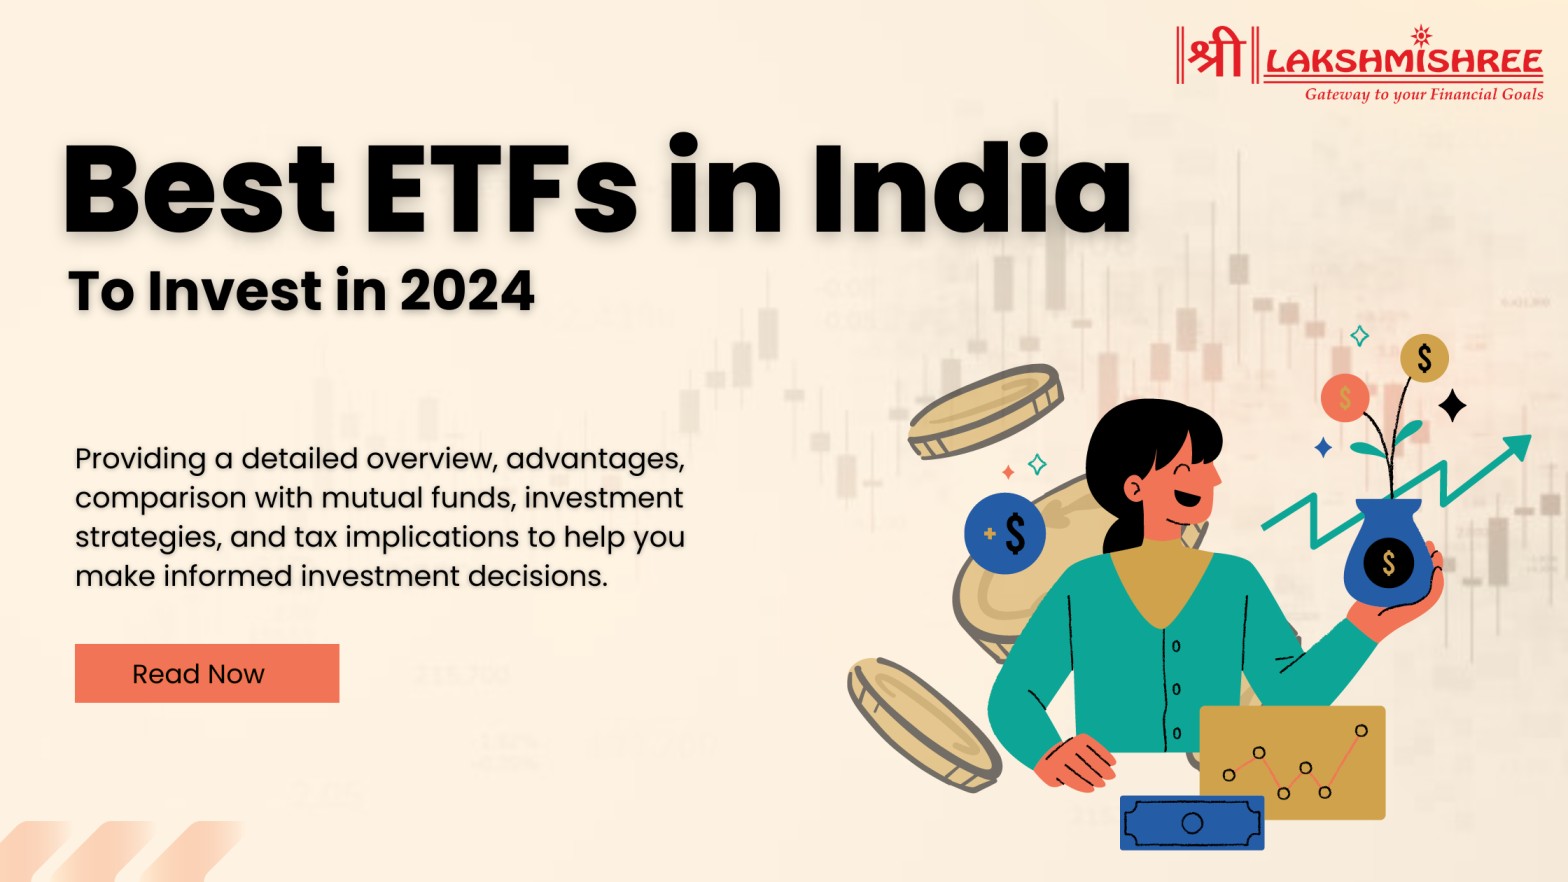 15 Best ETFs in India To Invest in 2024